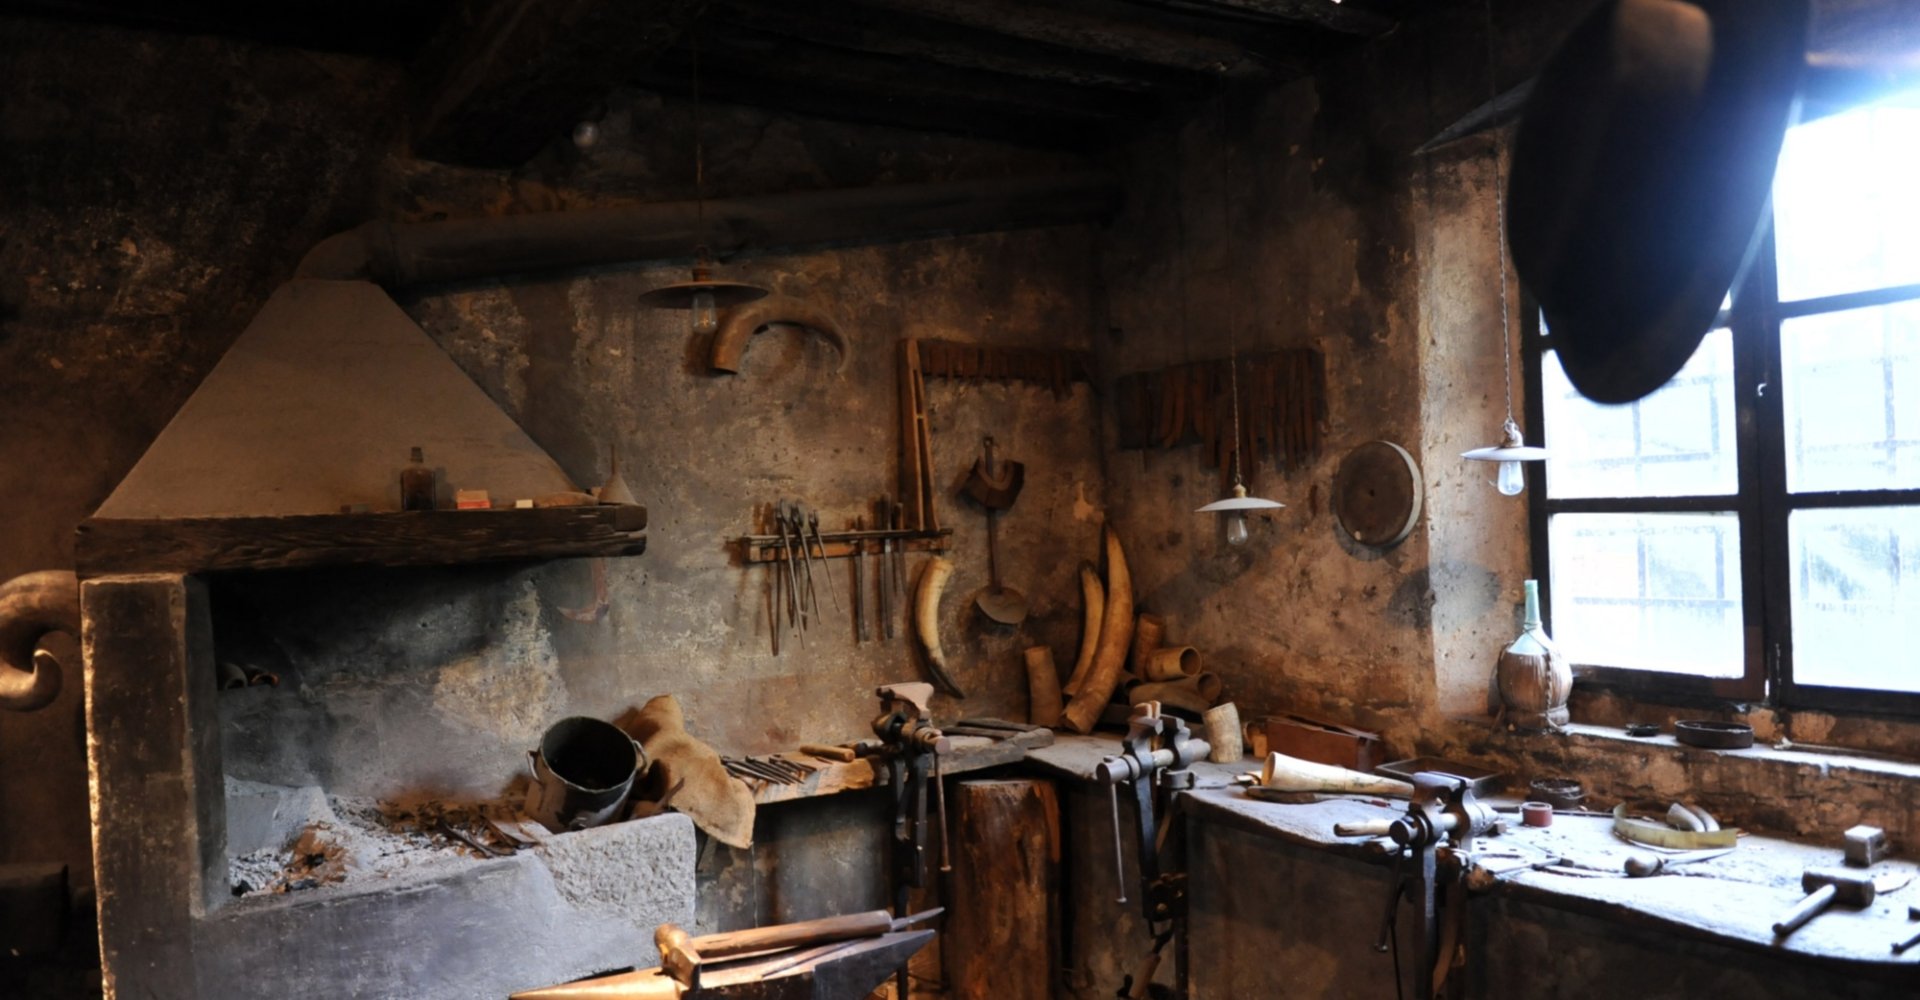 Knife-maker’s workshop, at the Museo dei Ferri Taglienti (Museum of the Sharp Irons)